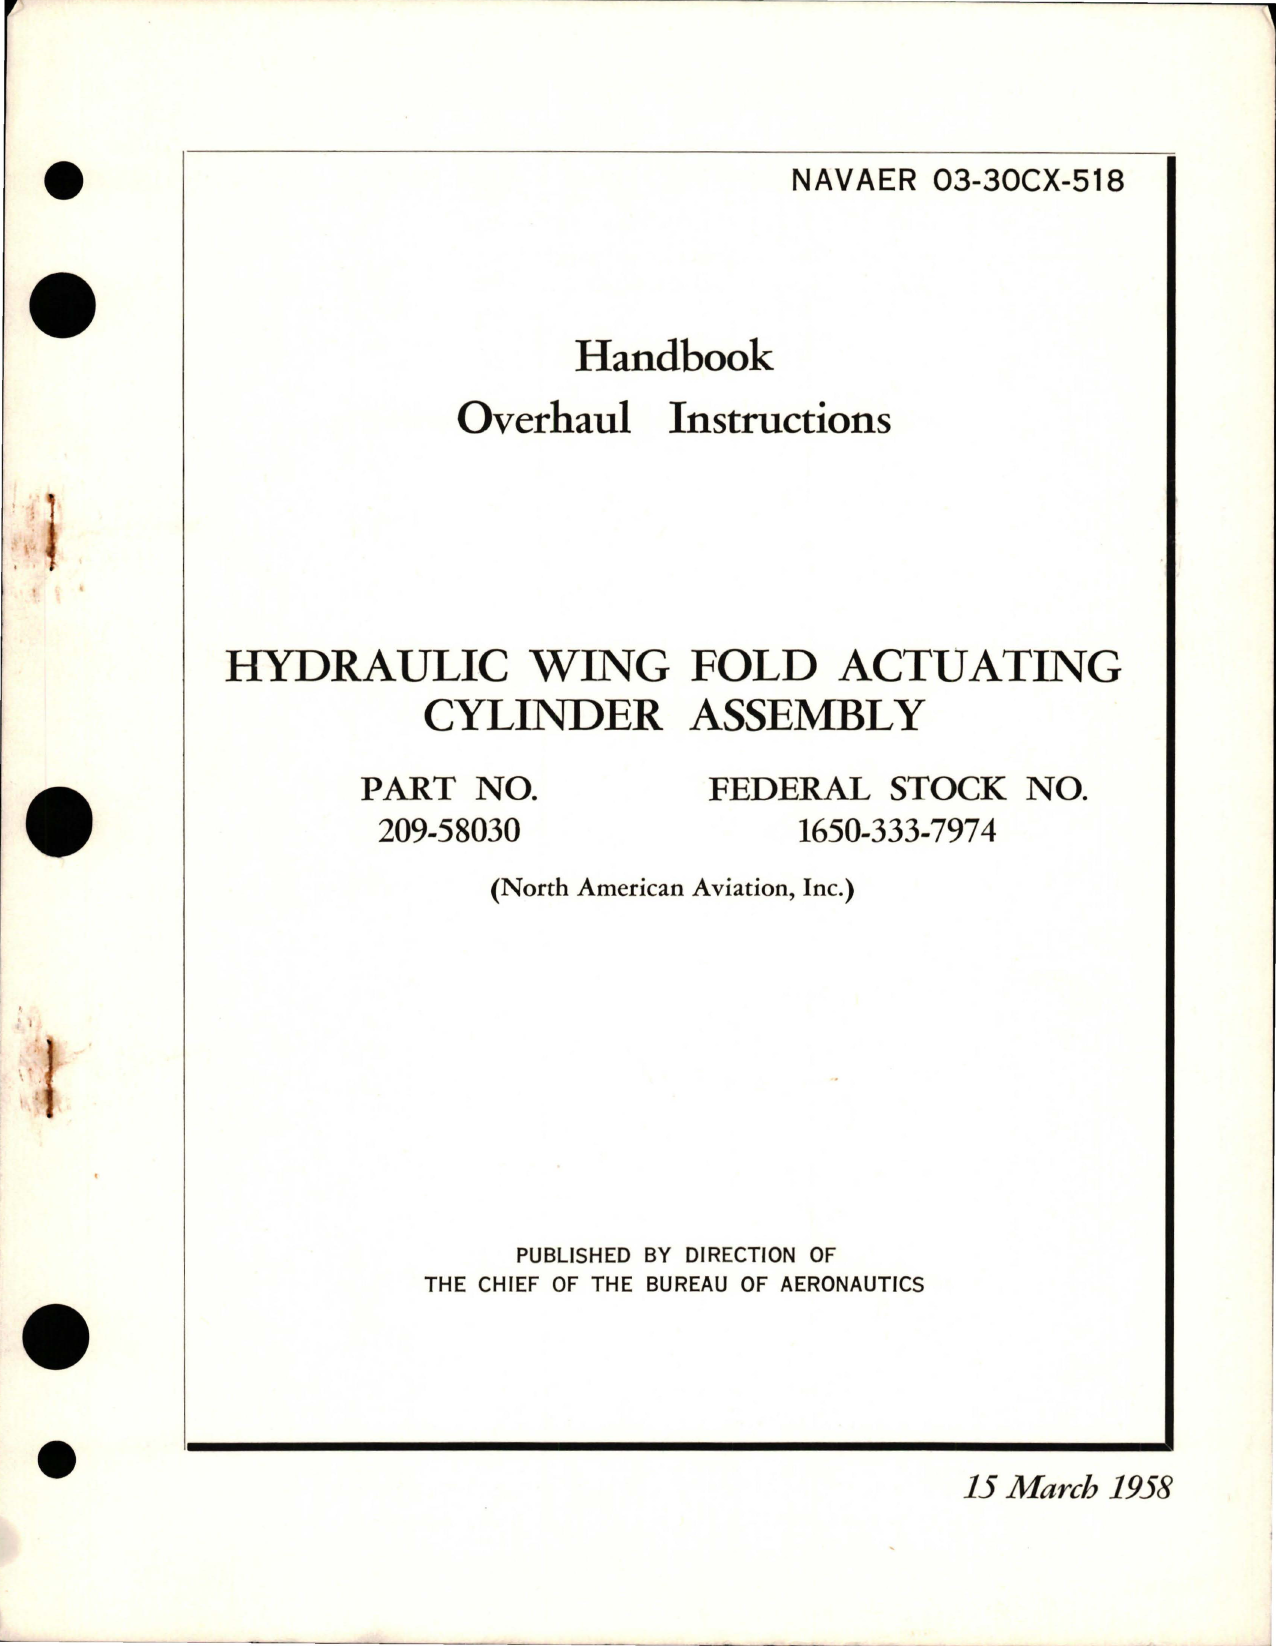 Sample page 1 from AirCorps Library document: Overhaul Instructions for Hydraulic Wing Fold Actuating Cylinder Assembly - Part 209-58030 